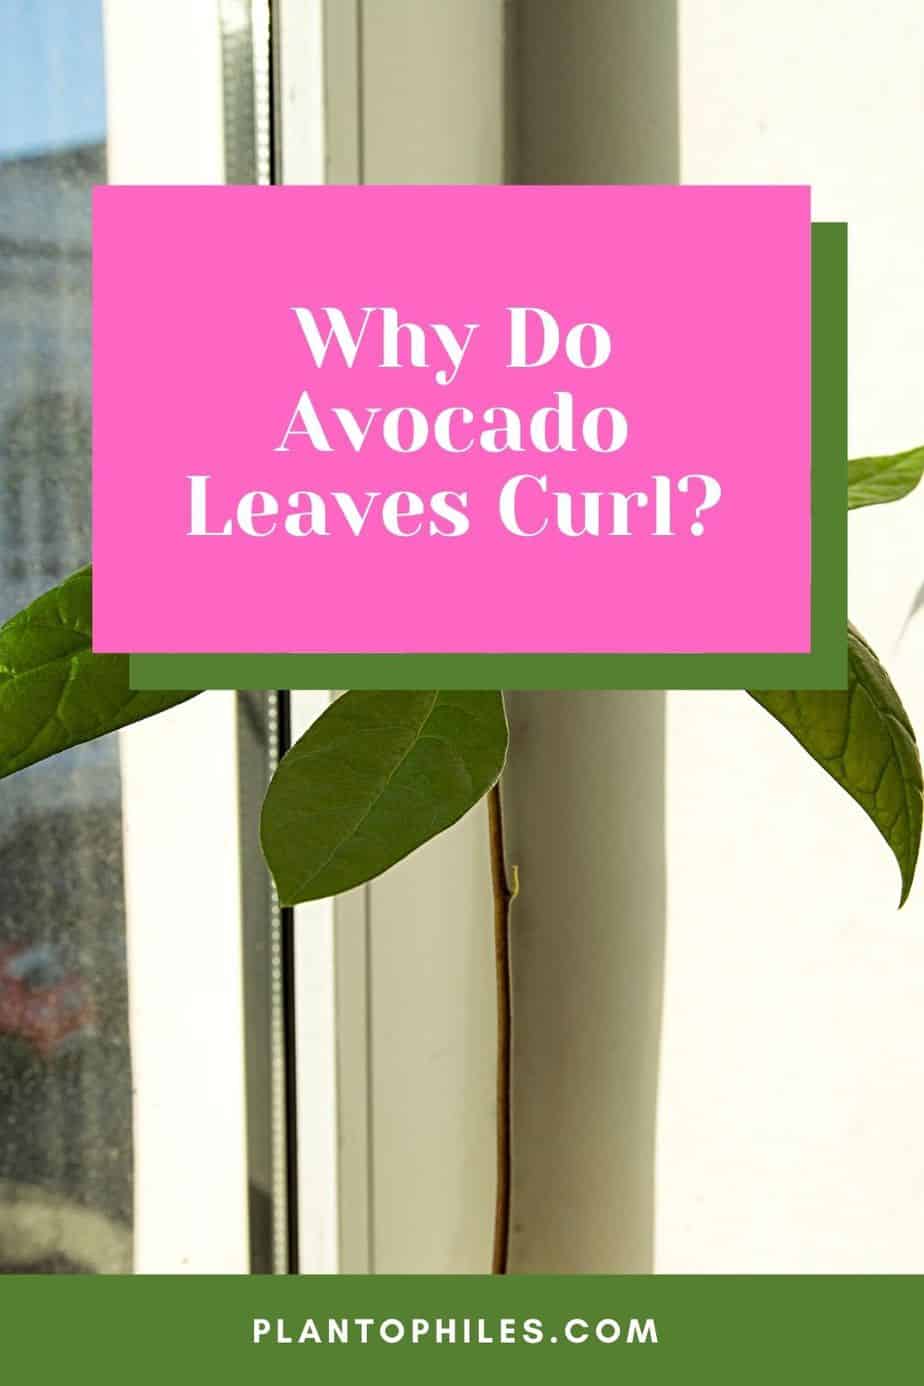 Why Do Avocado Leaves Curl?